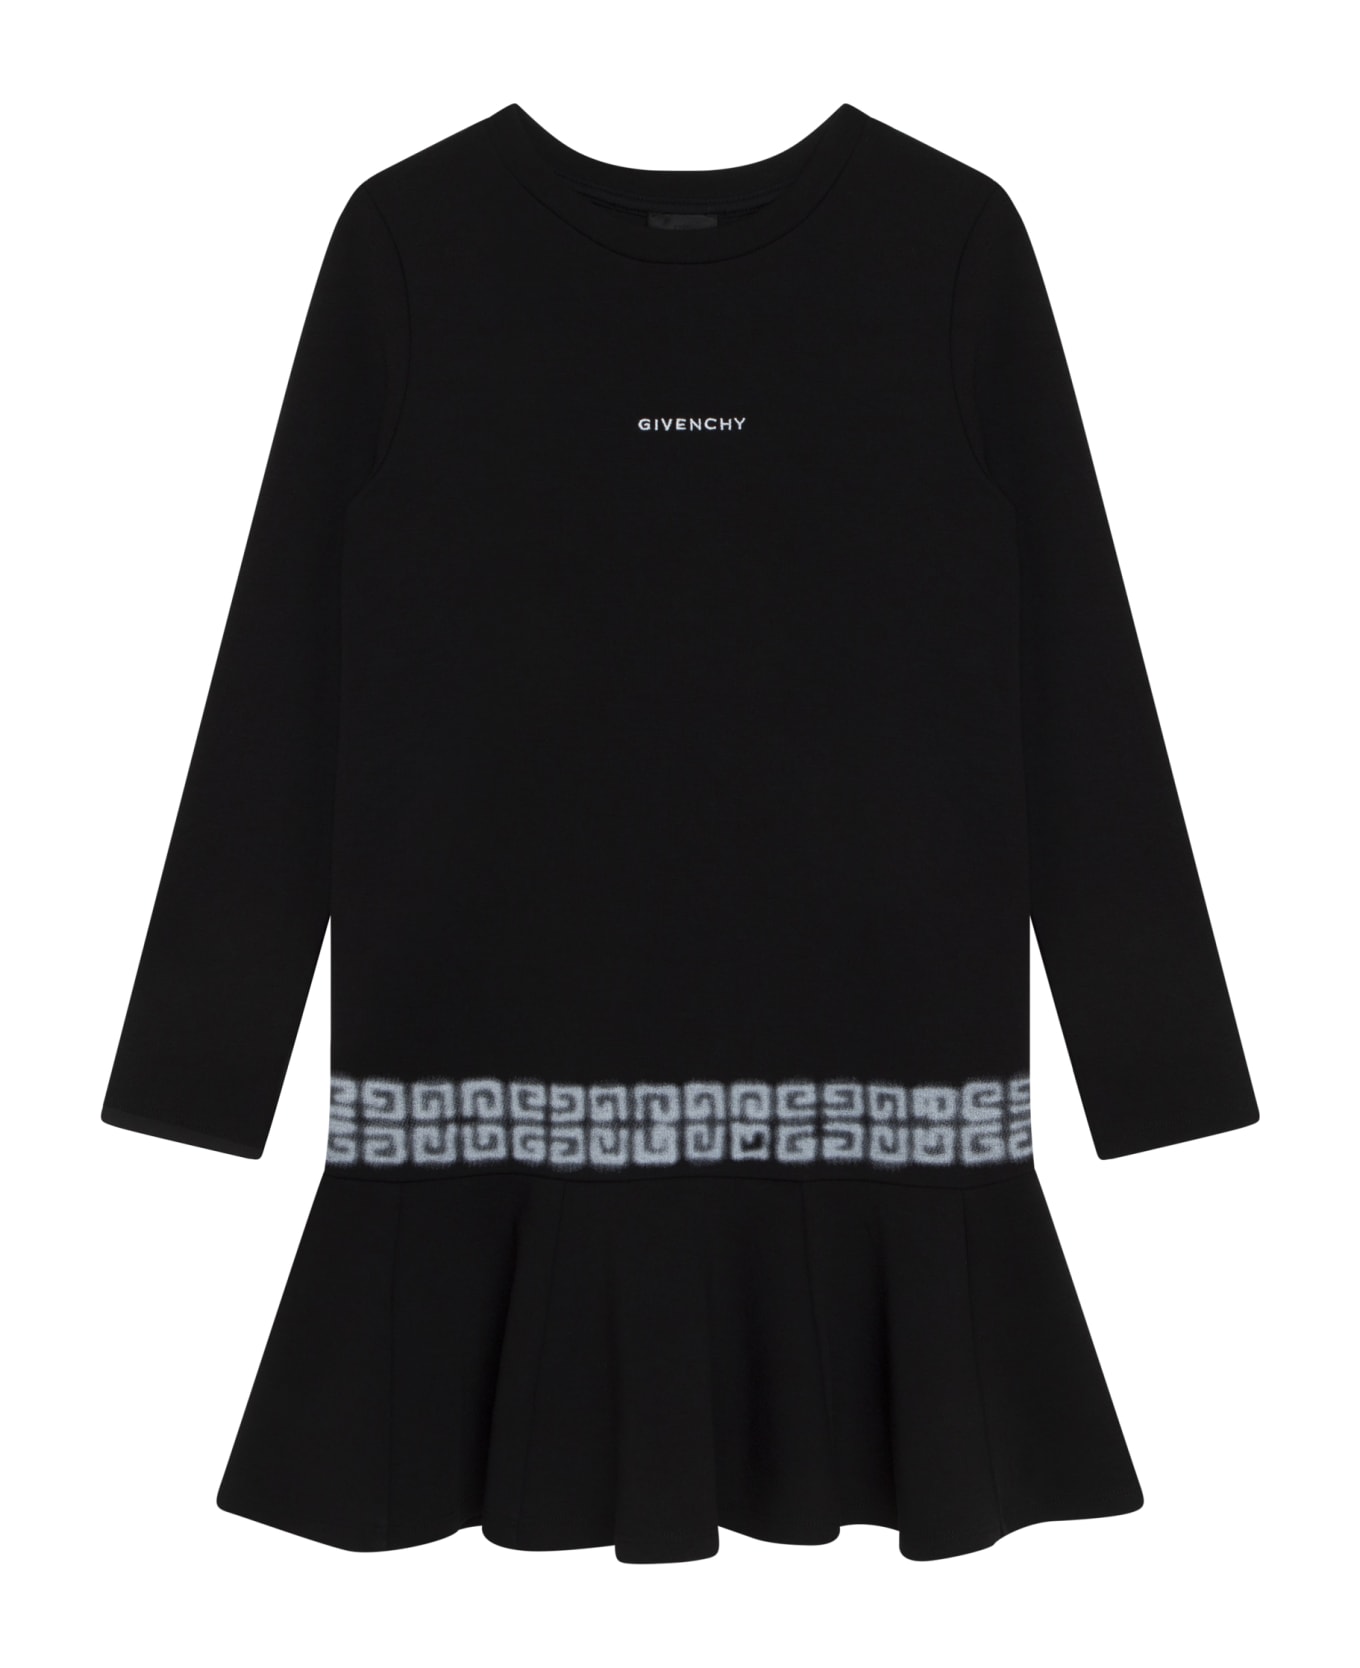 Givenchy Dress With Print - Black